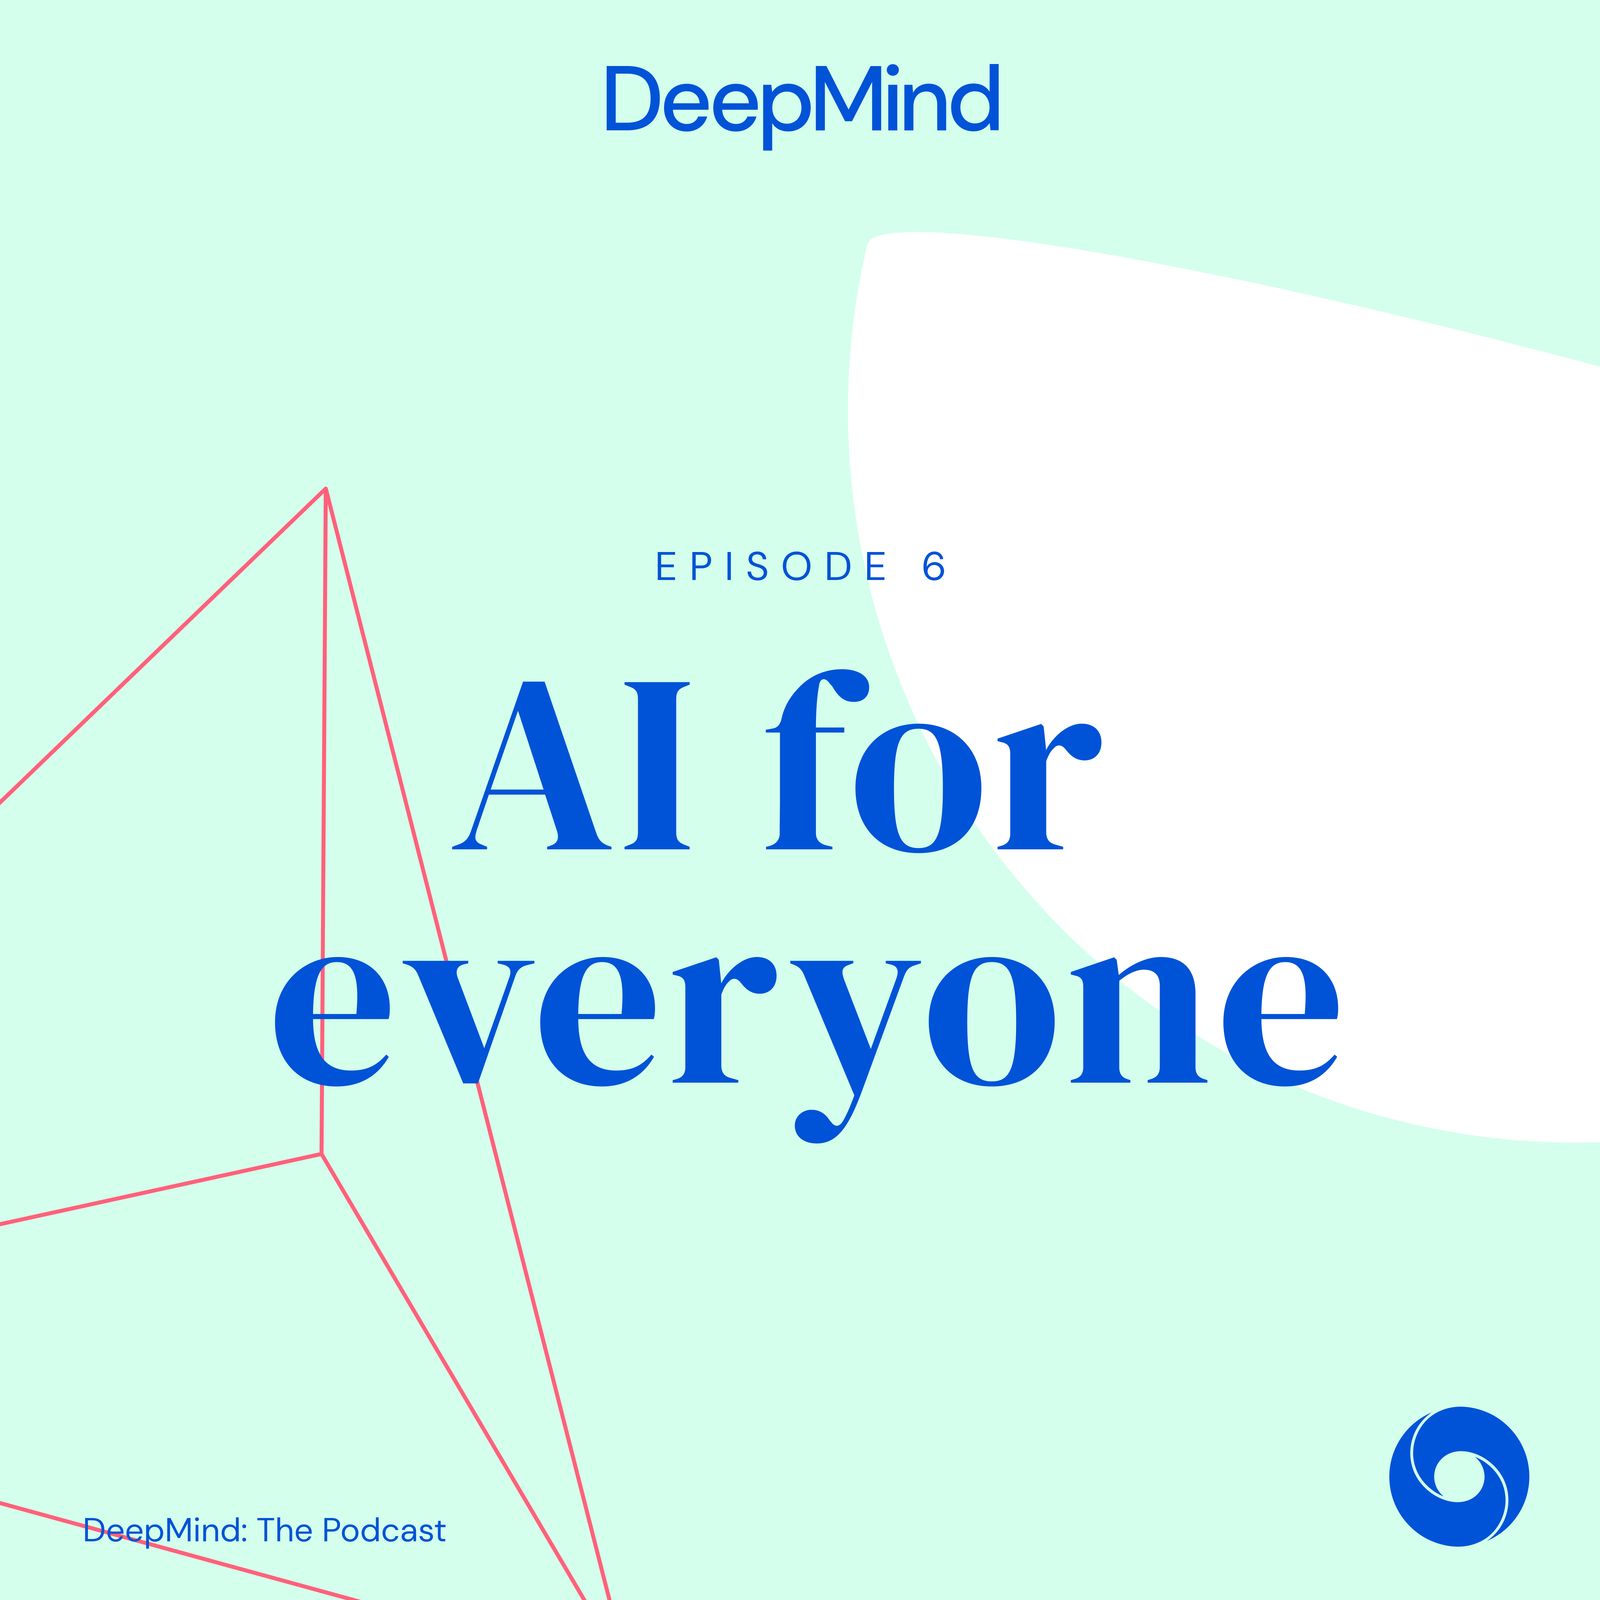 S1 Ep6: AI for everyone